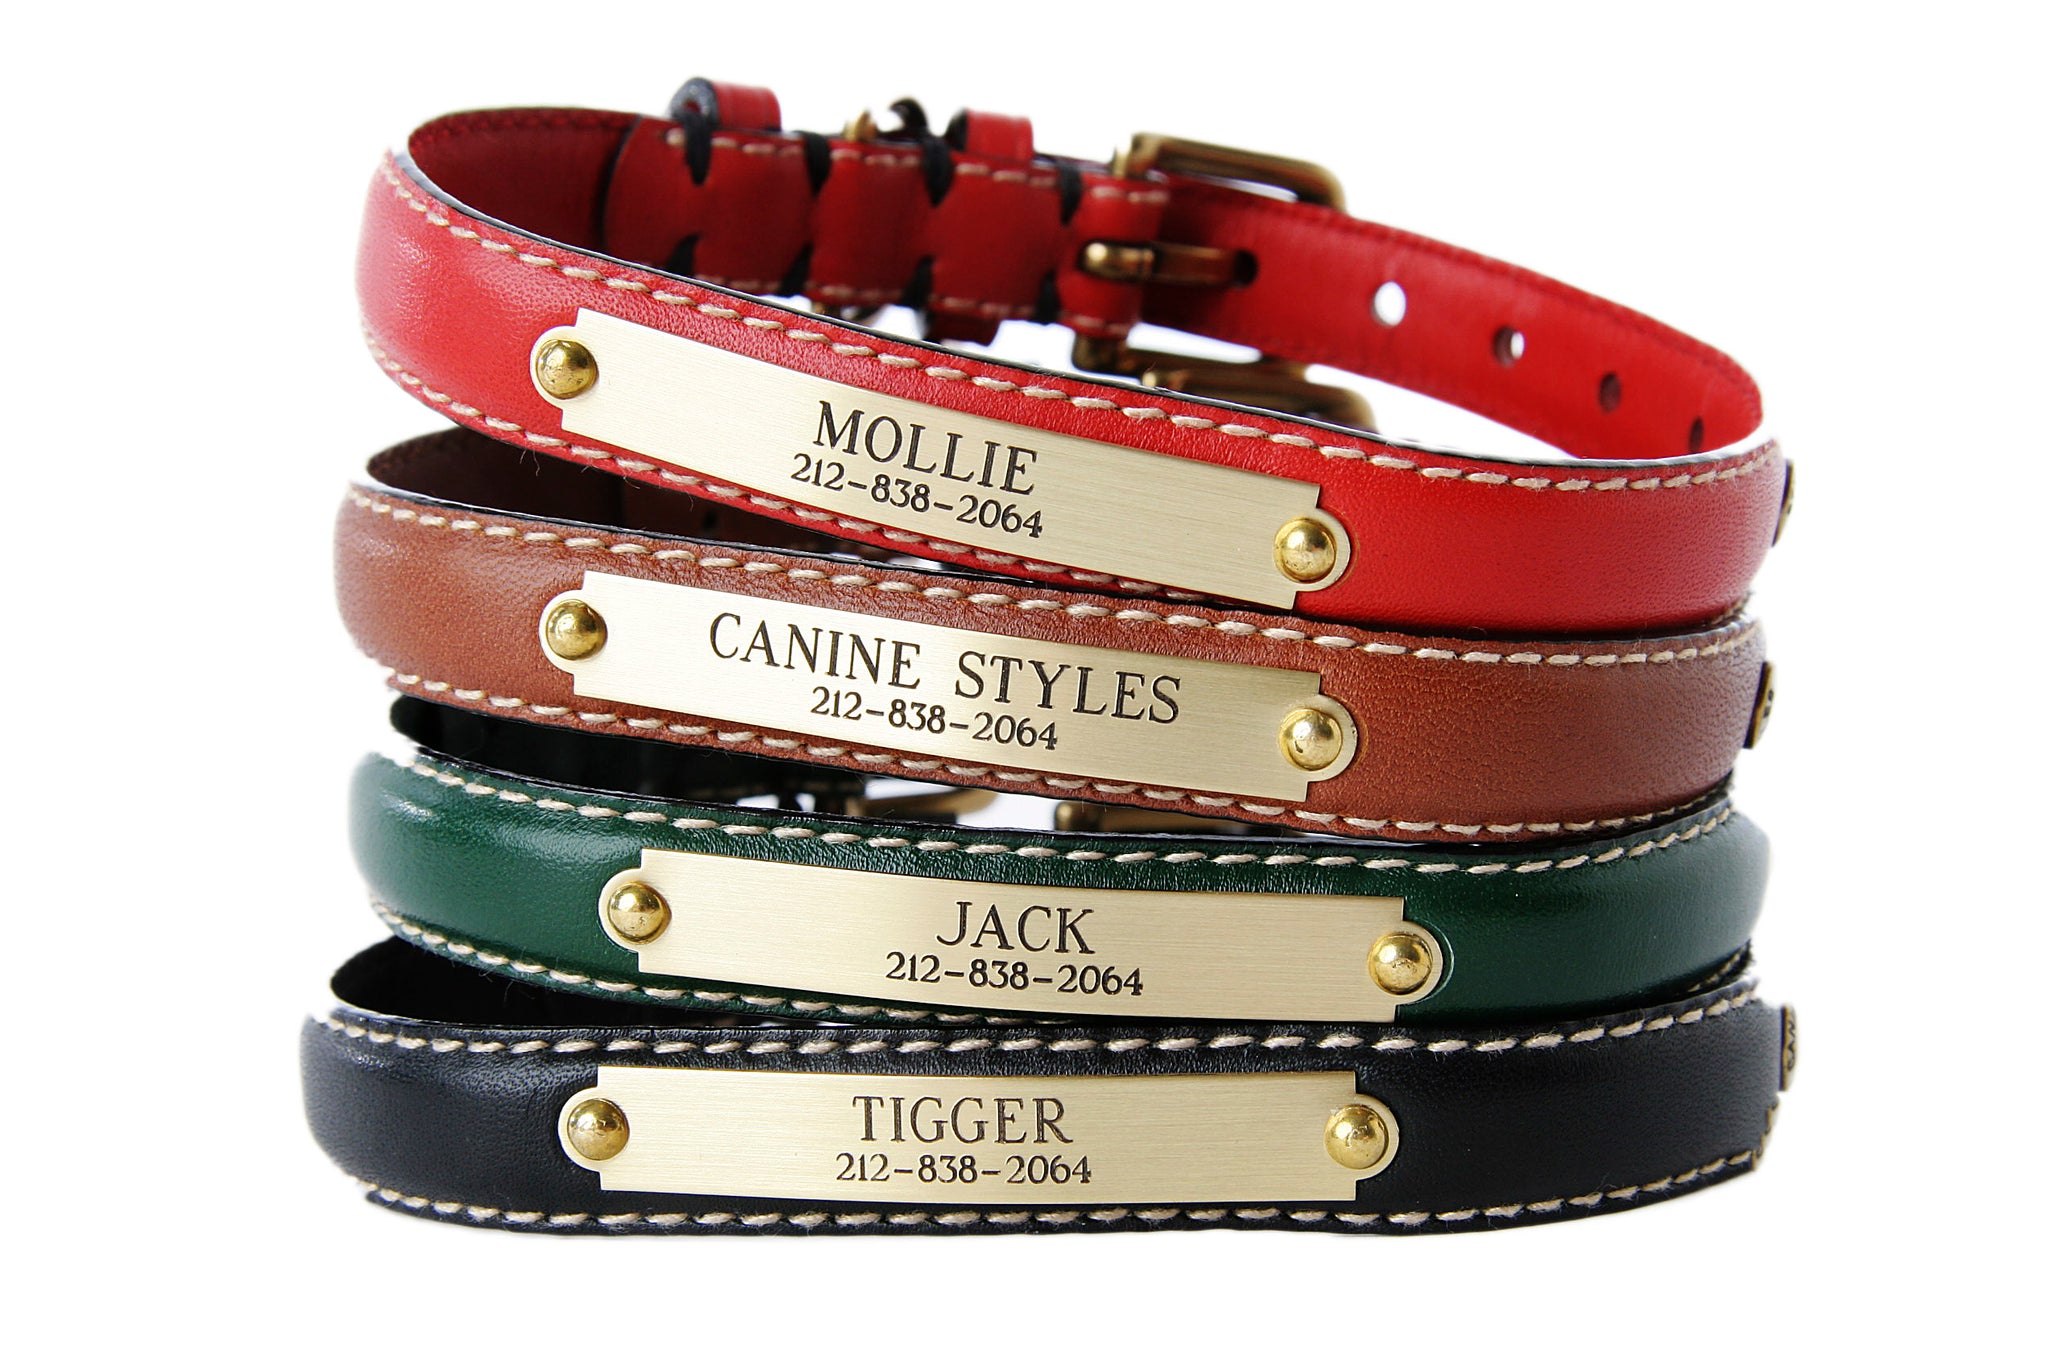 Dog Collars & Dog Leads - Canine Styles Classic Flat Leather - Brass Name Plaque - 5 Color Options